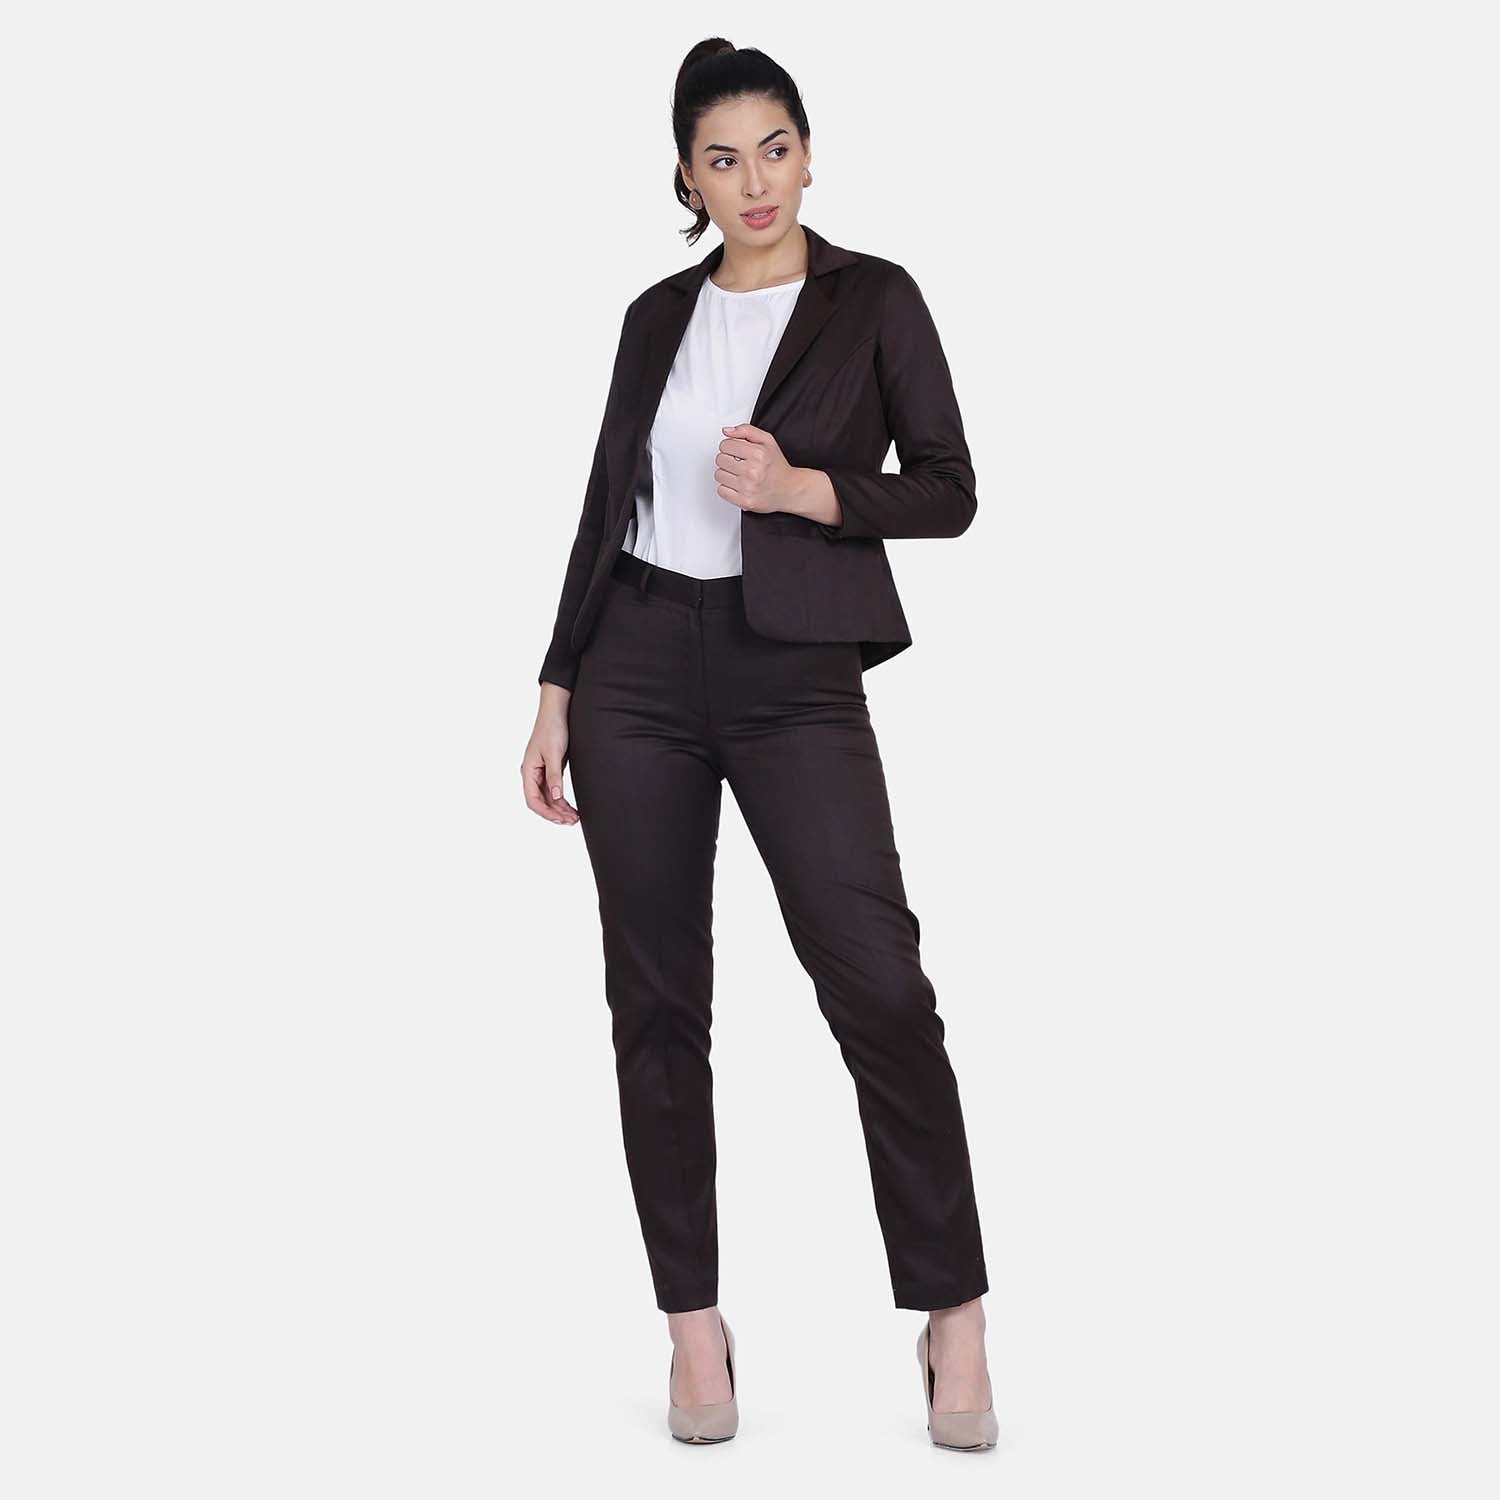 Stretch Pant Suit for Women - Chocolate Brown